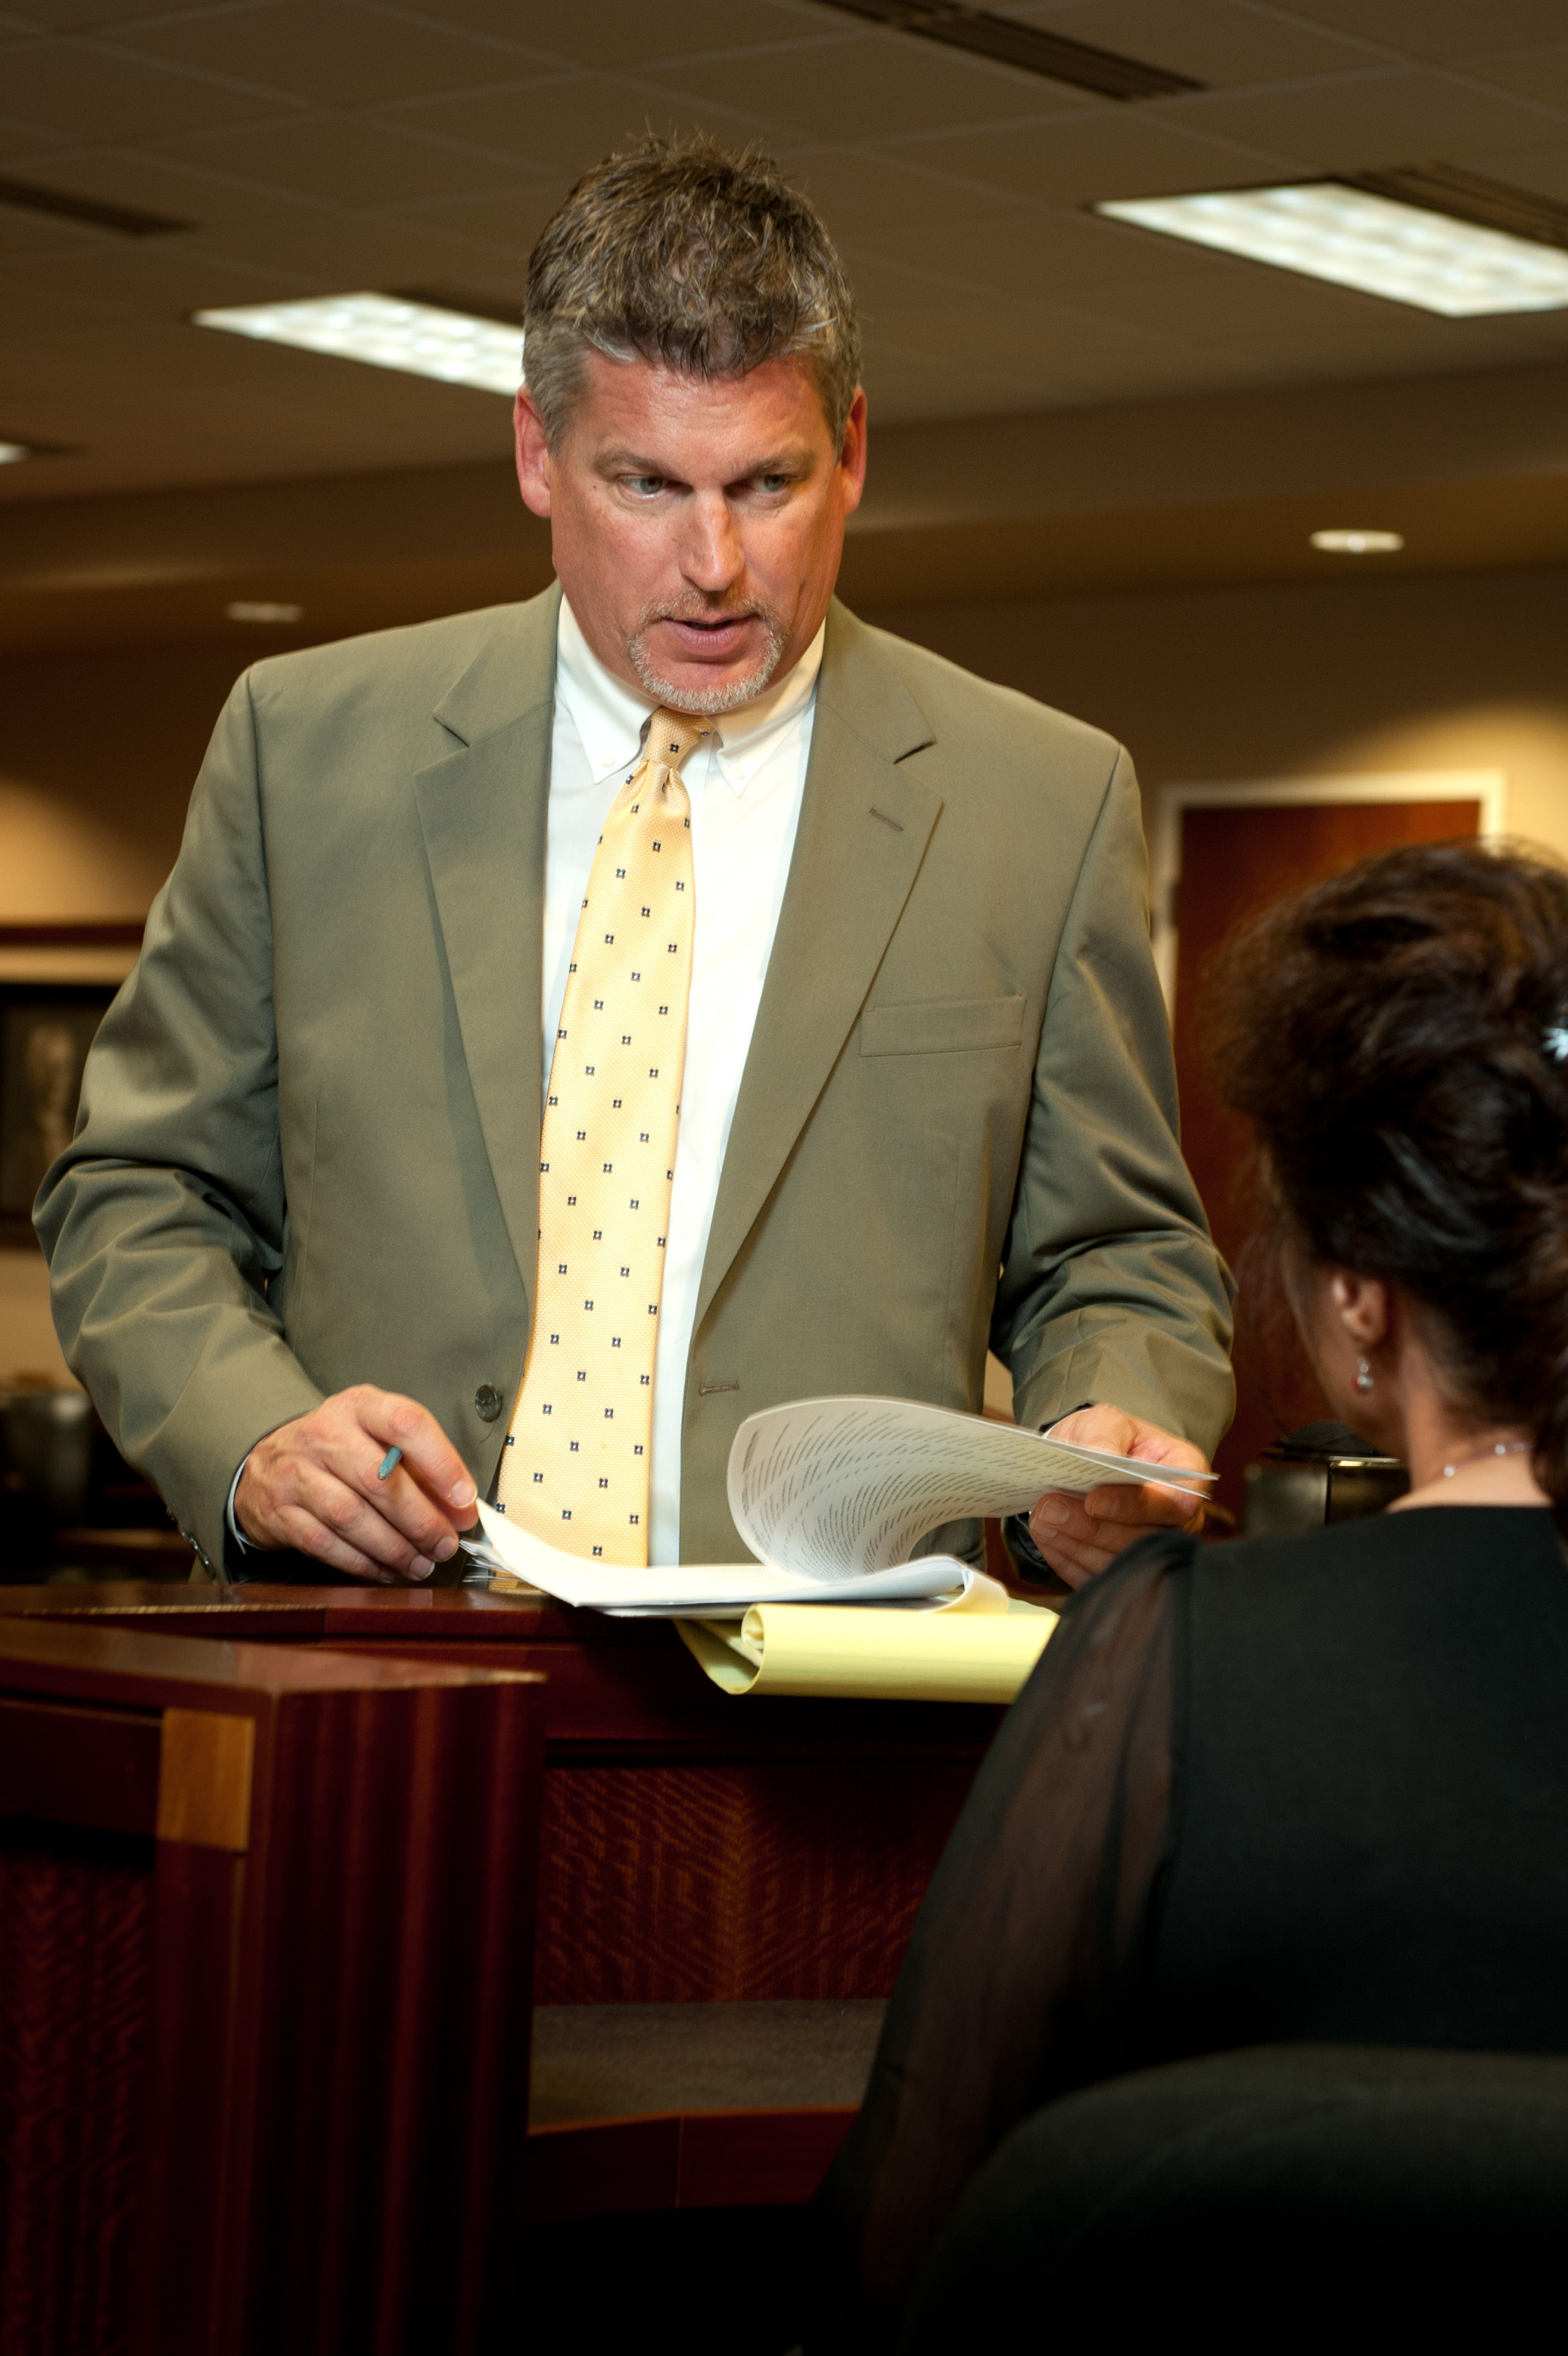 Attorney Paul J. Dickman principal from Dickman Law Office P.S.C. representing his client in court